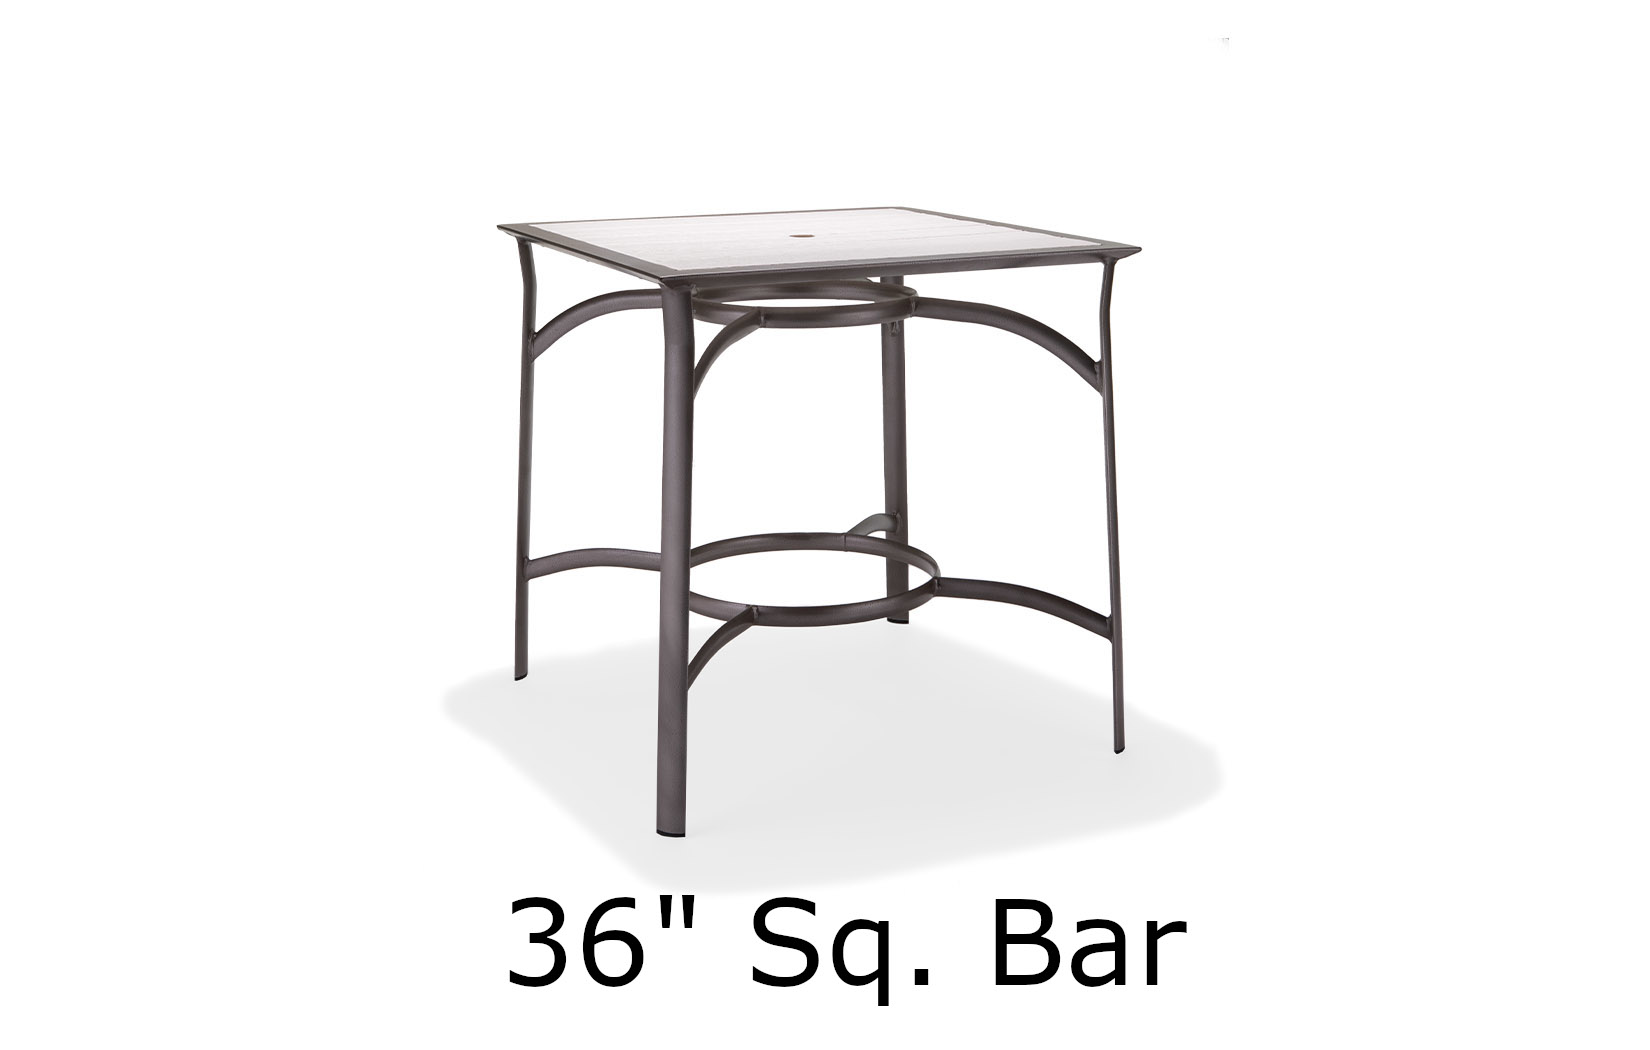 Seascape Collection 36 Inch Square Bar Height Table